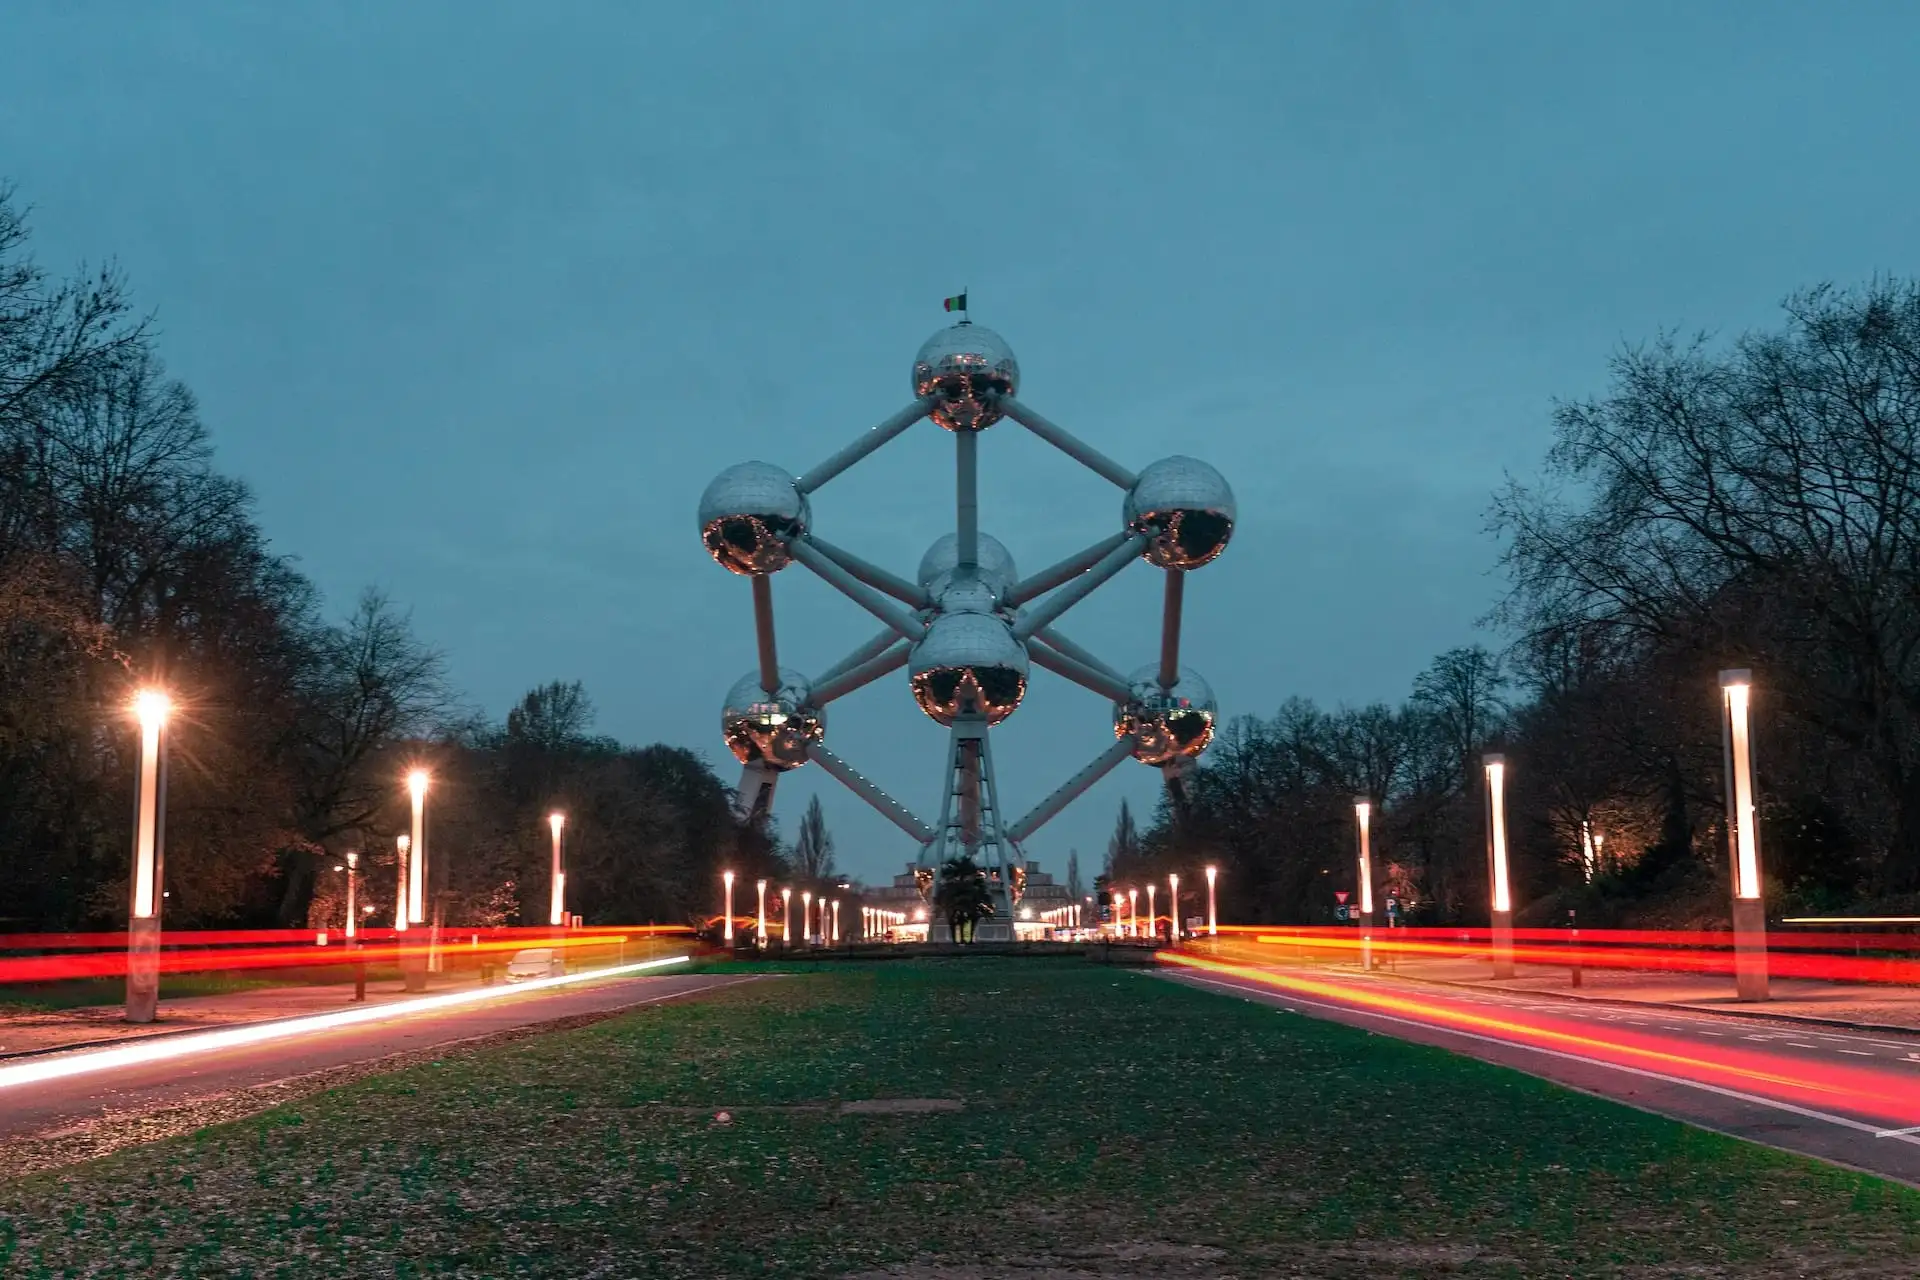 The magnificent Atomium of Brussels